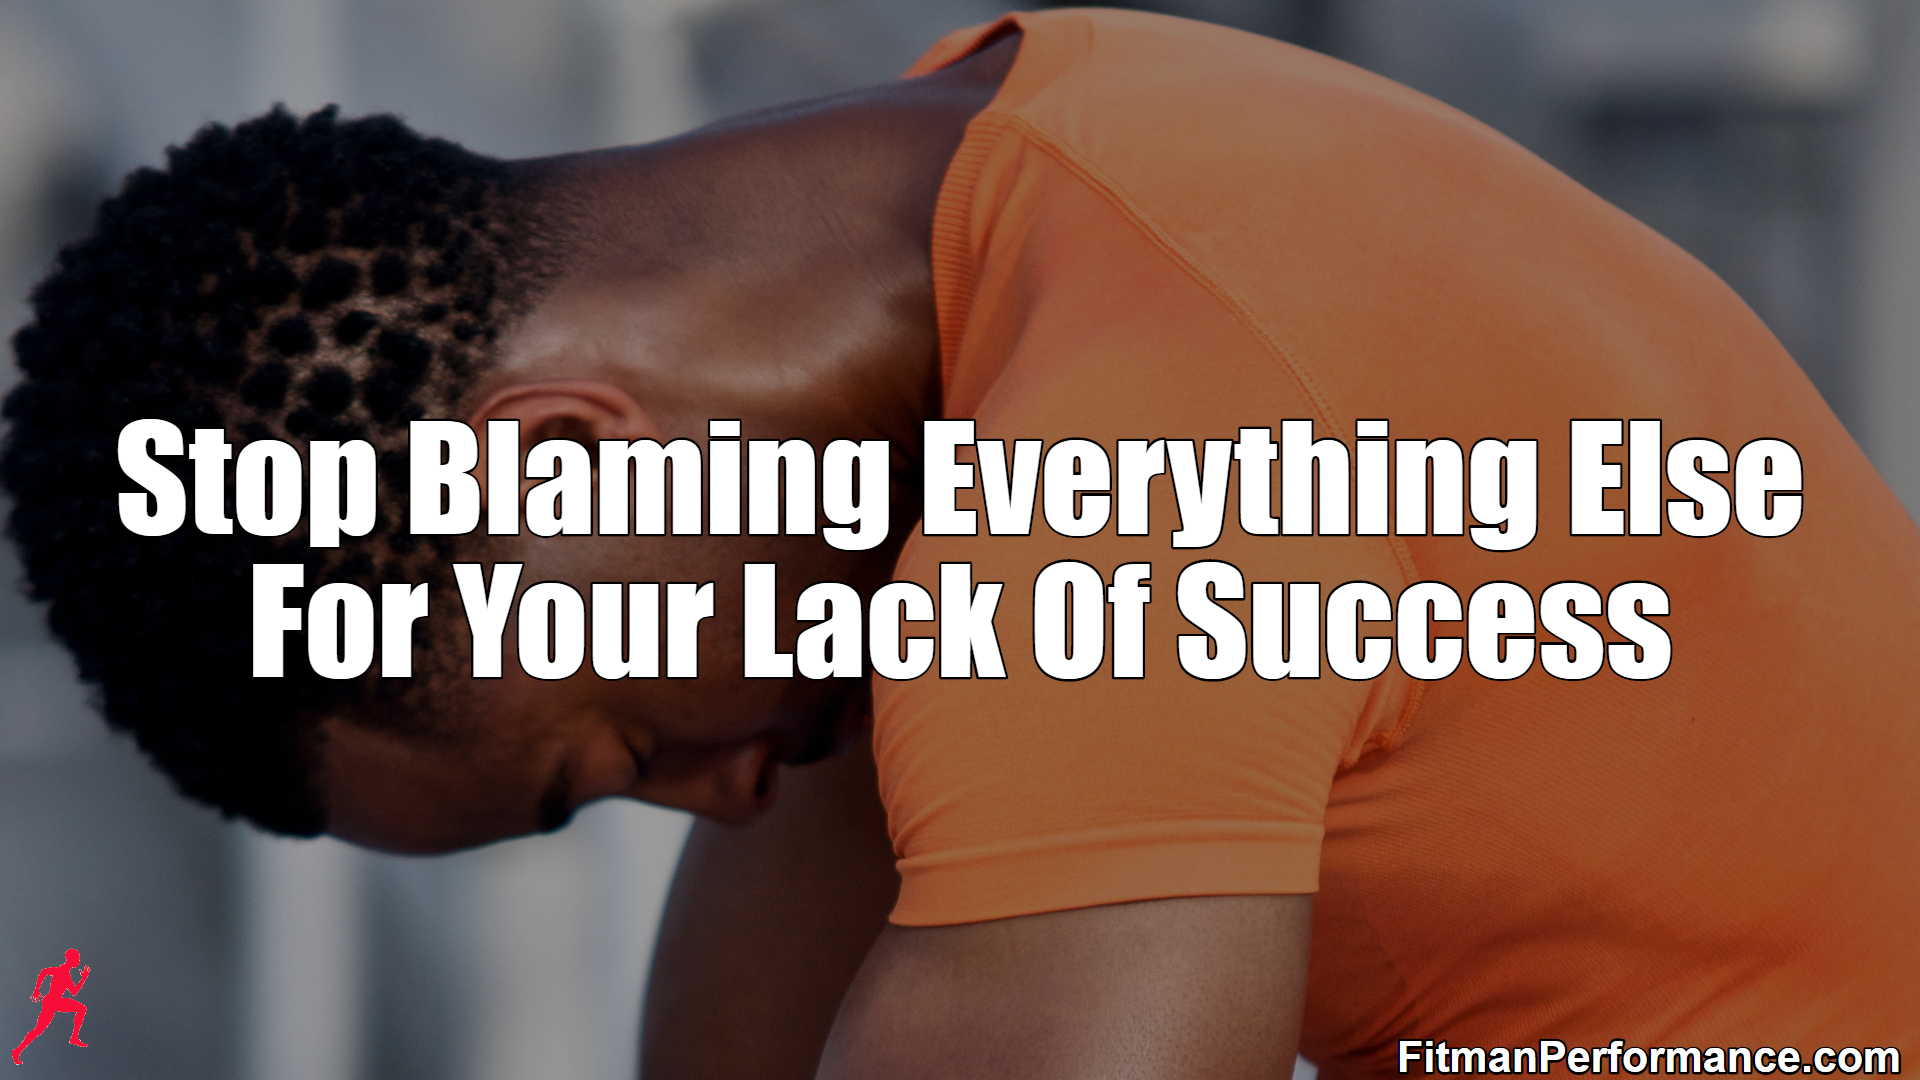 Stop Blaming Others (And Everything Else)